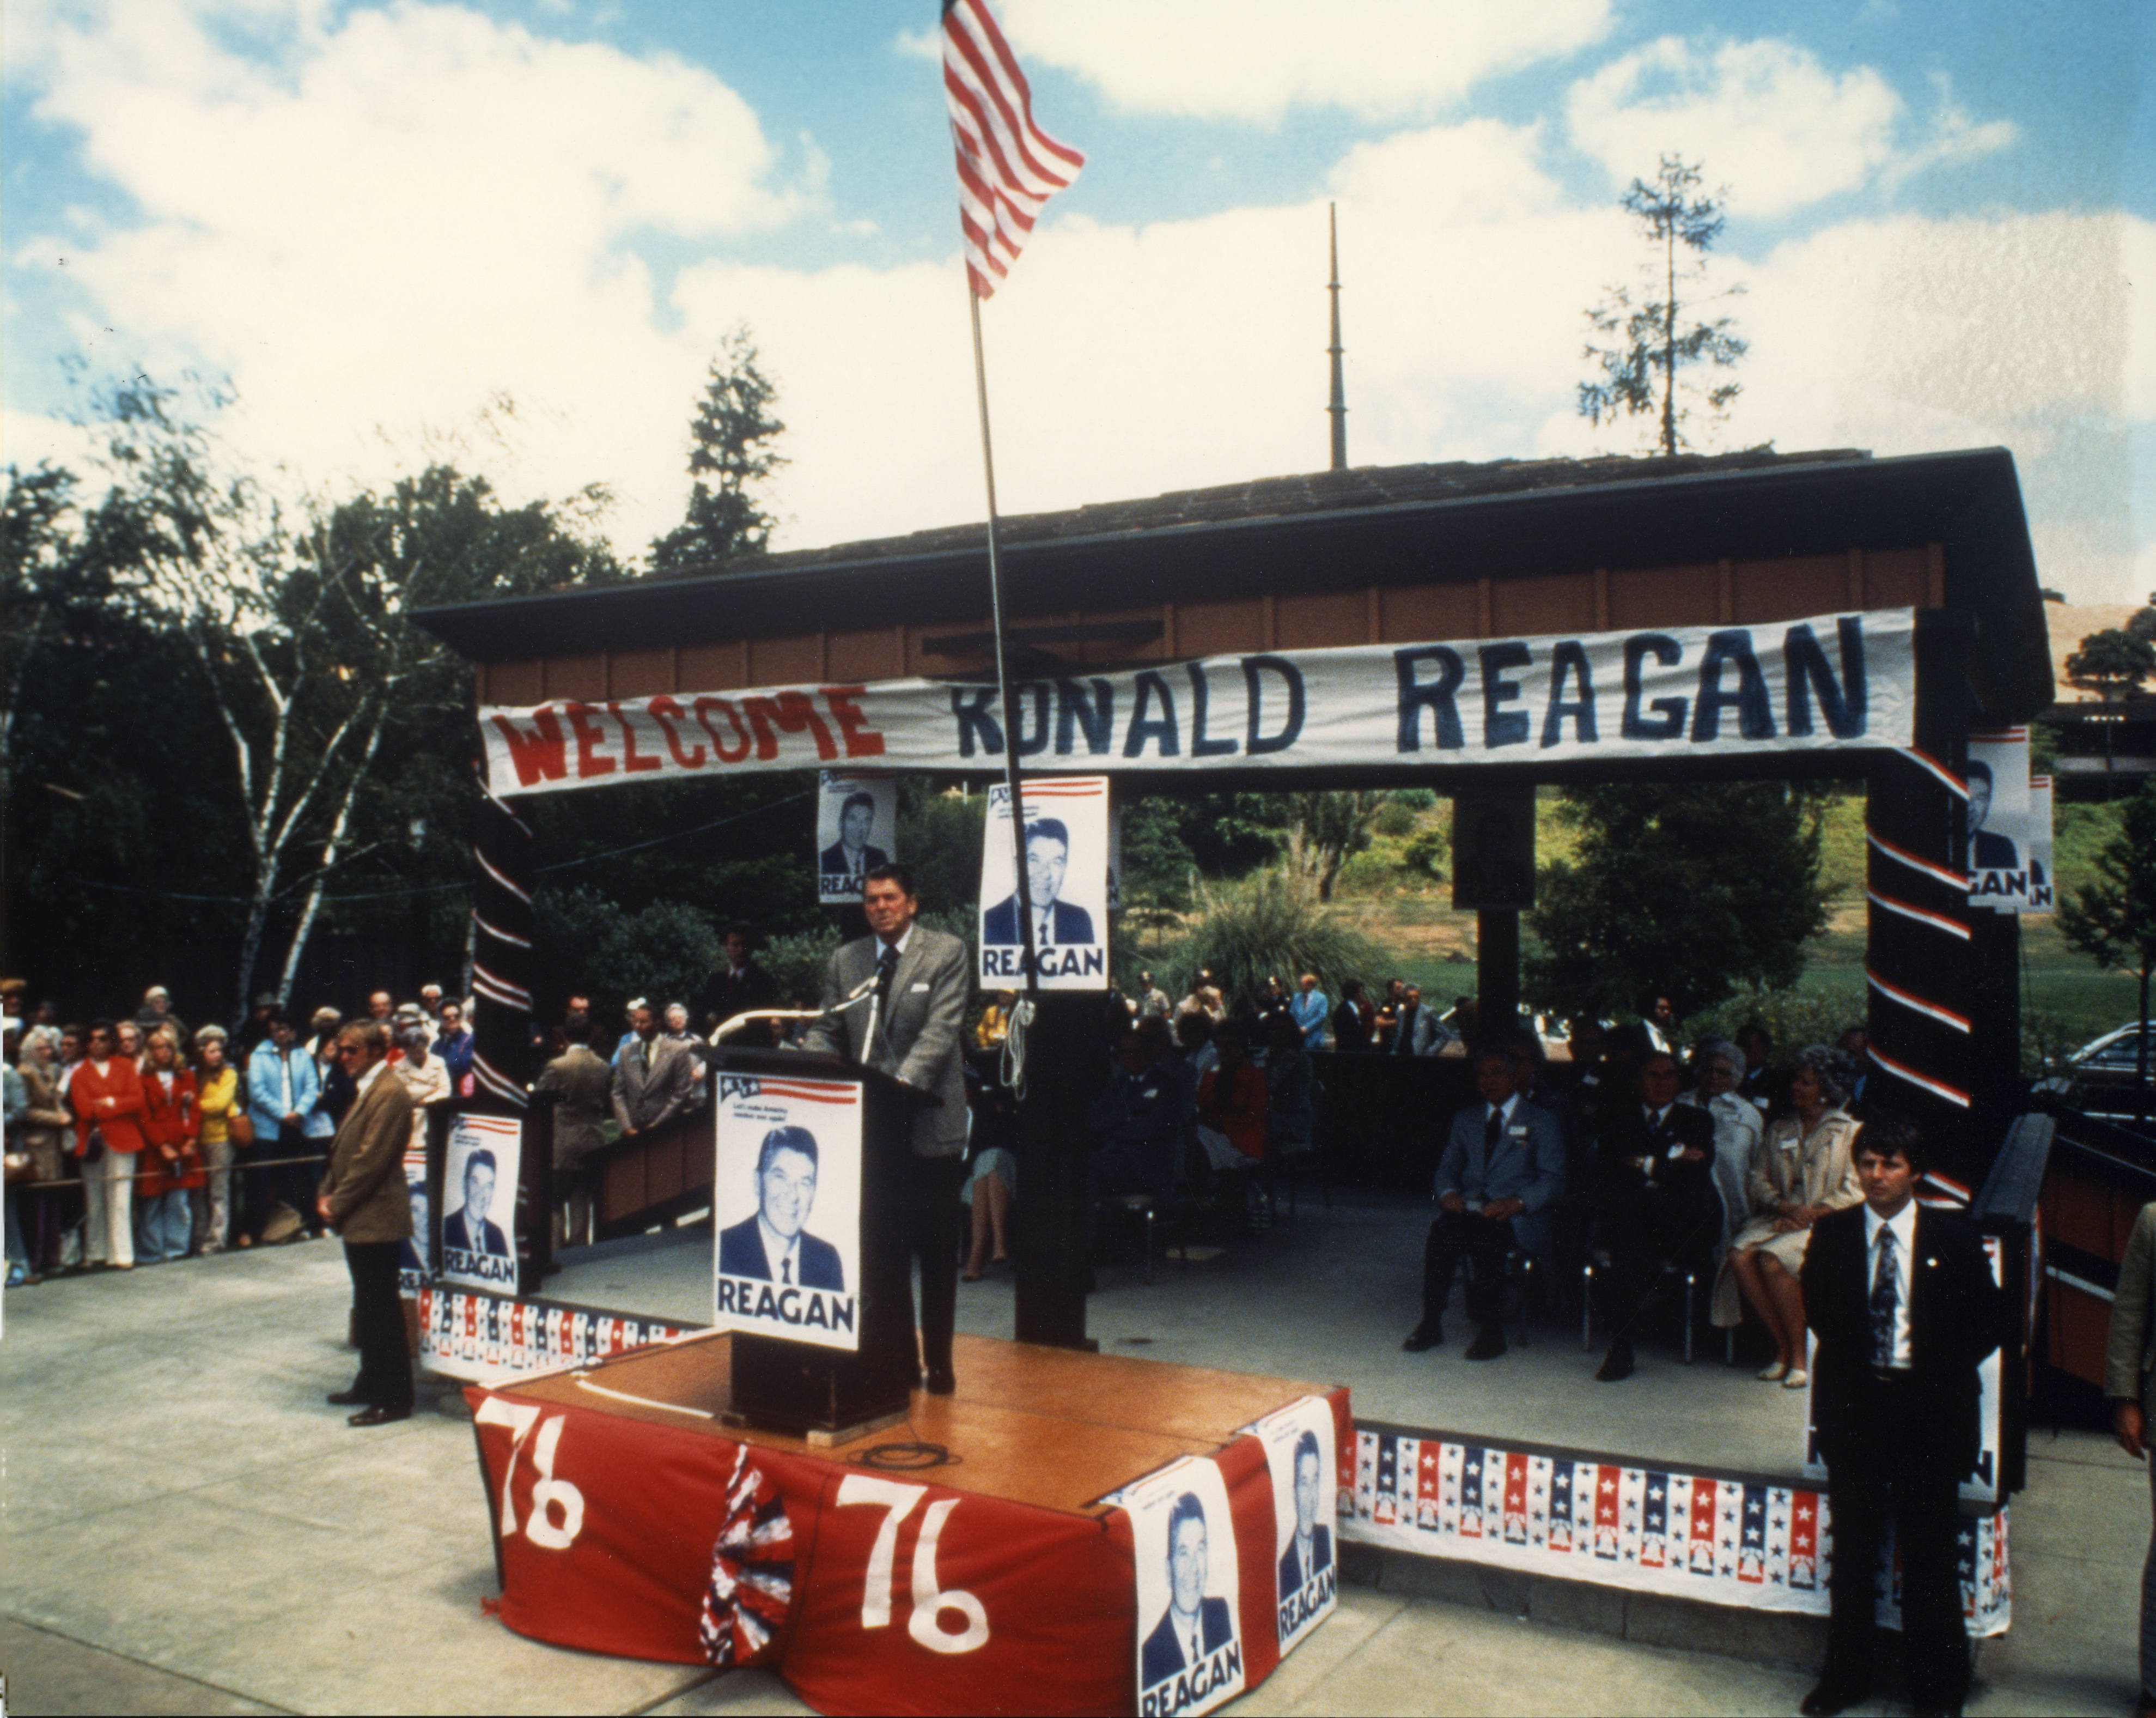 1976 campaign speech by Ronald Reagan at unknown location